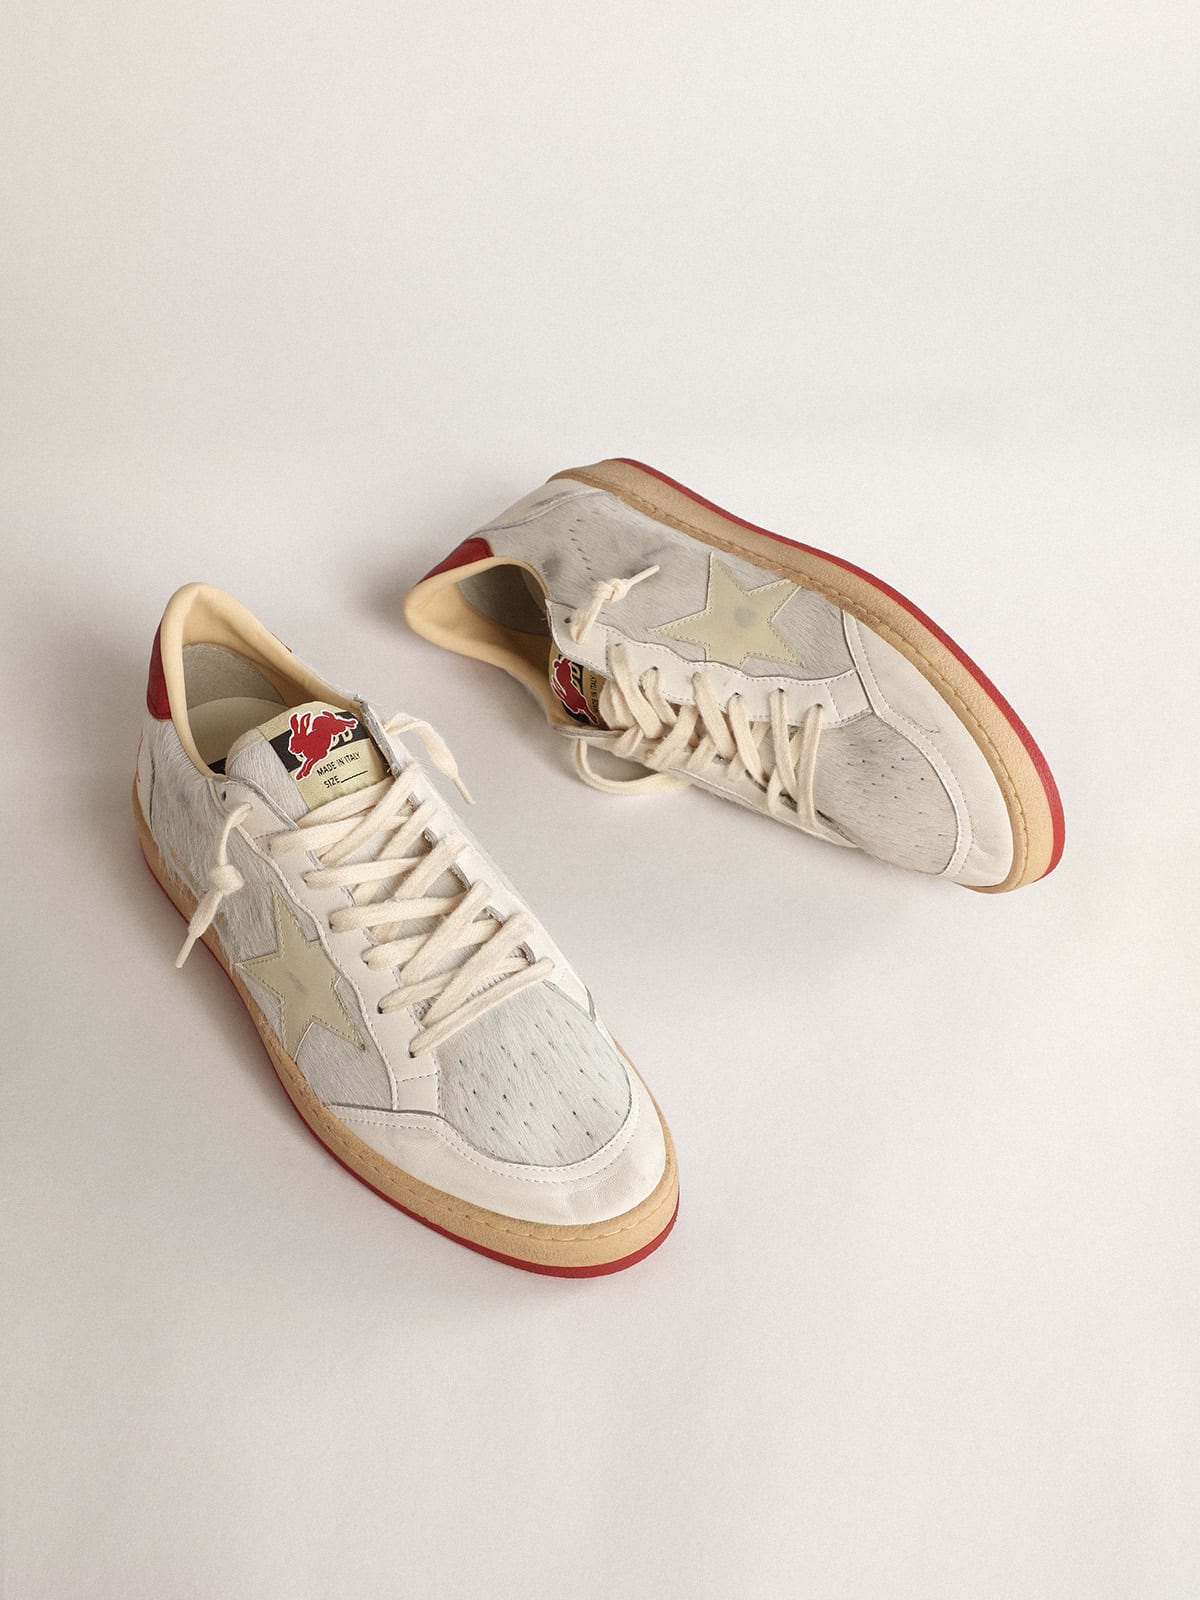 Golden Goose - Men’s Ball Star LTD CNY in white pony skin with leather star in 